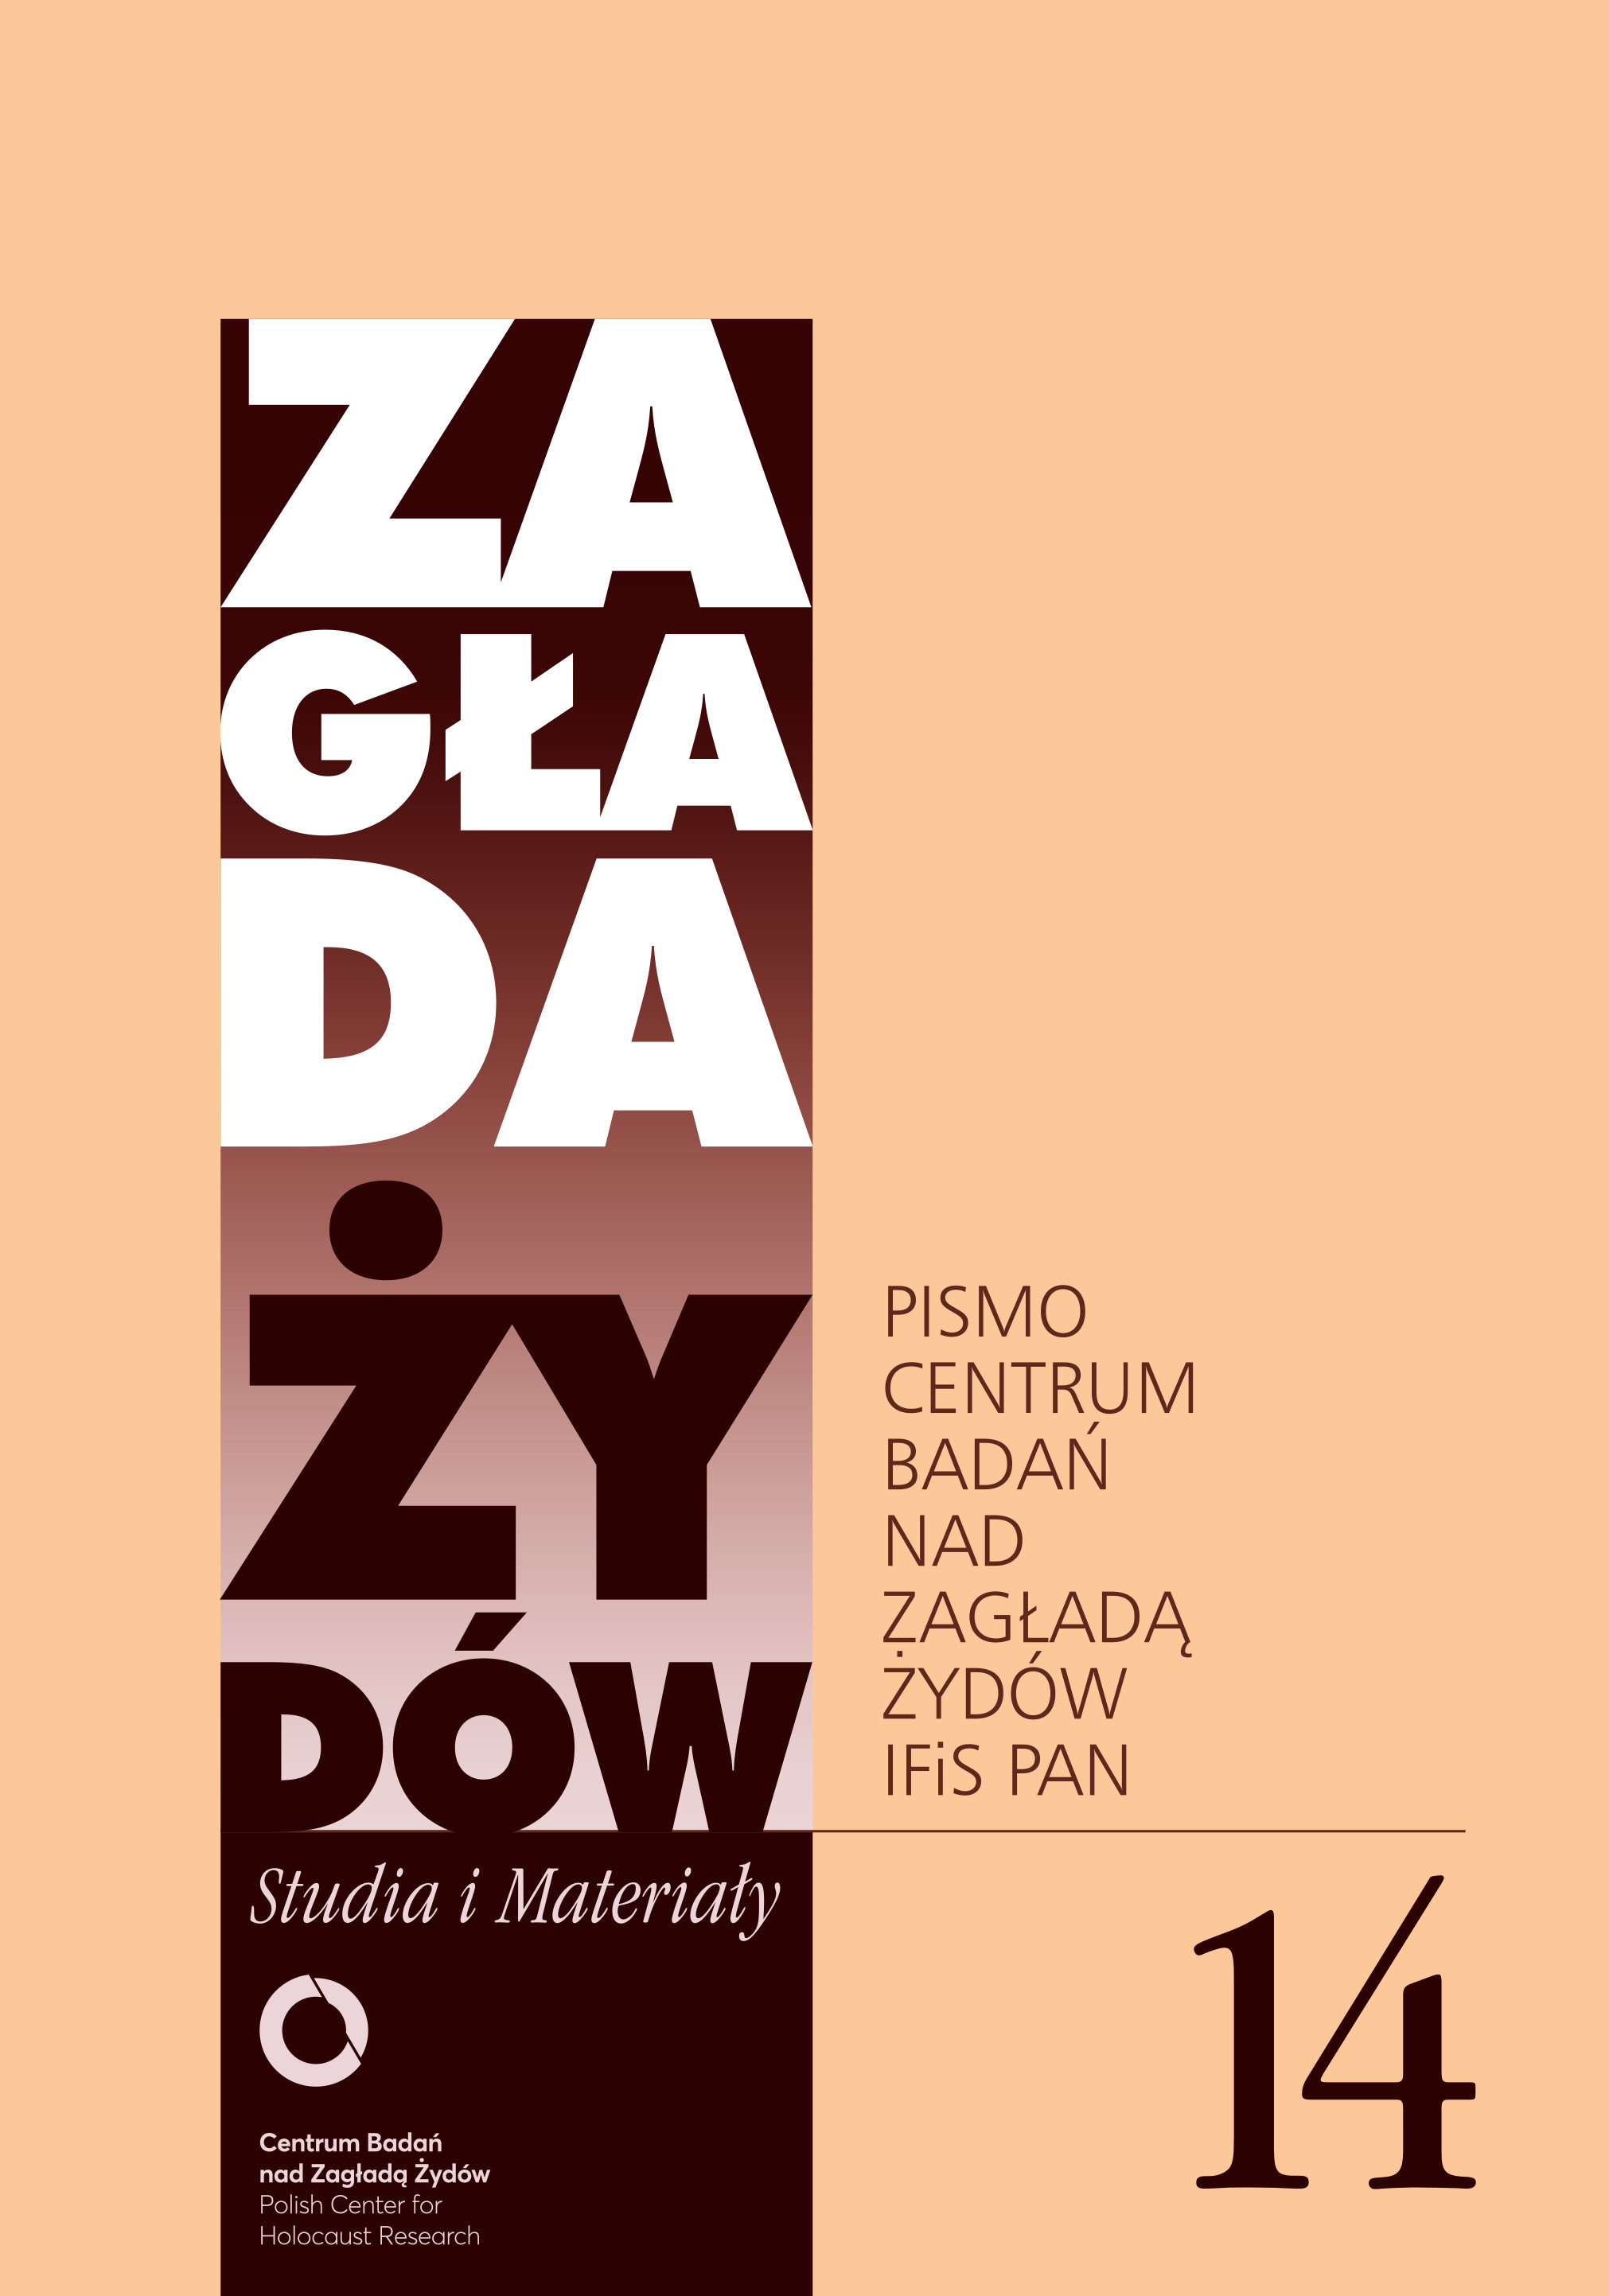 “Żegota. Hidden Aid” – Exhibition About Council to Aid Jews in The Historical Museum of the City of Kraków Cover Image